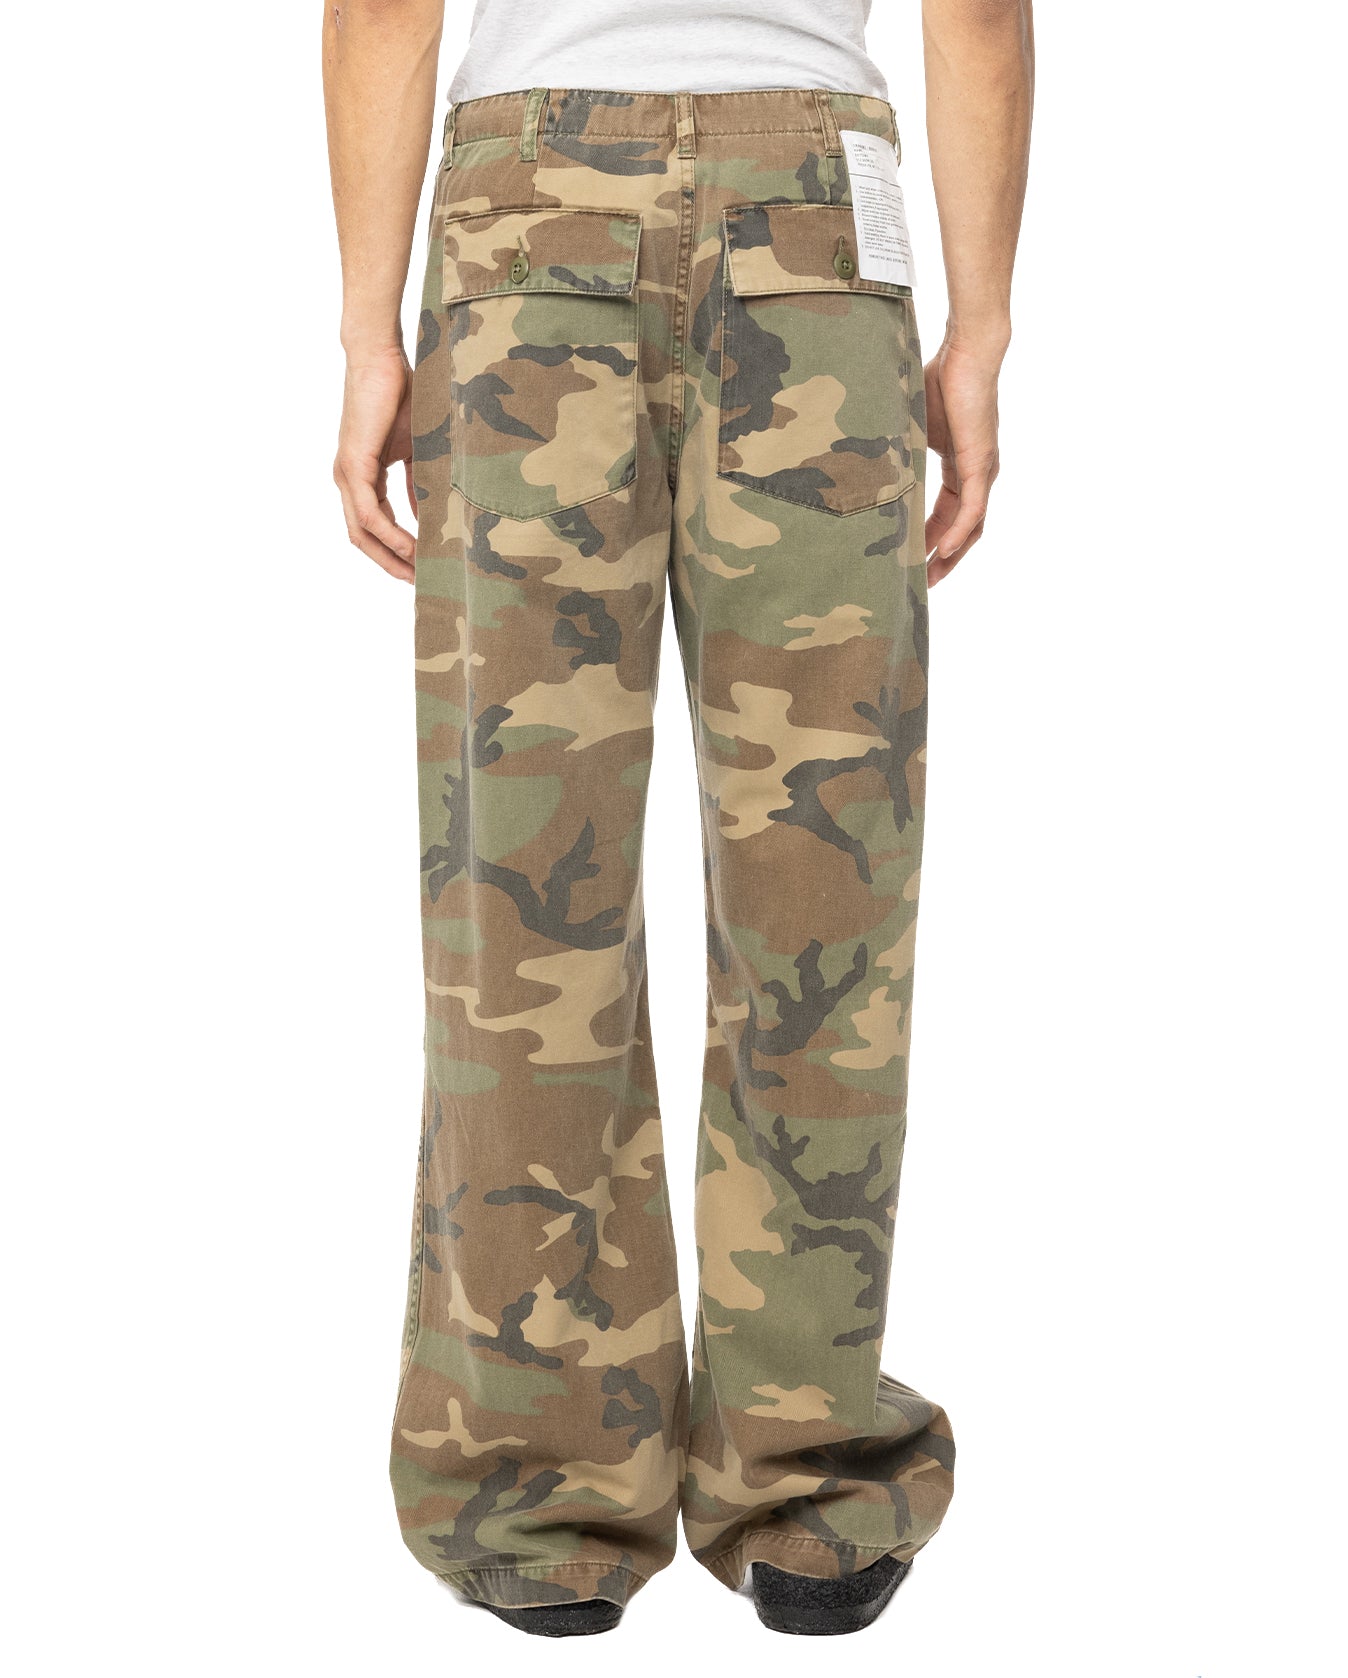 Messy Marines Navy Blue Camo Hoppers – Unisex Pants For Men And Women -  Bombay Trooper